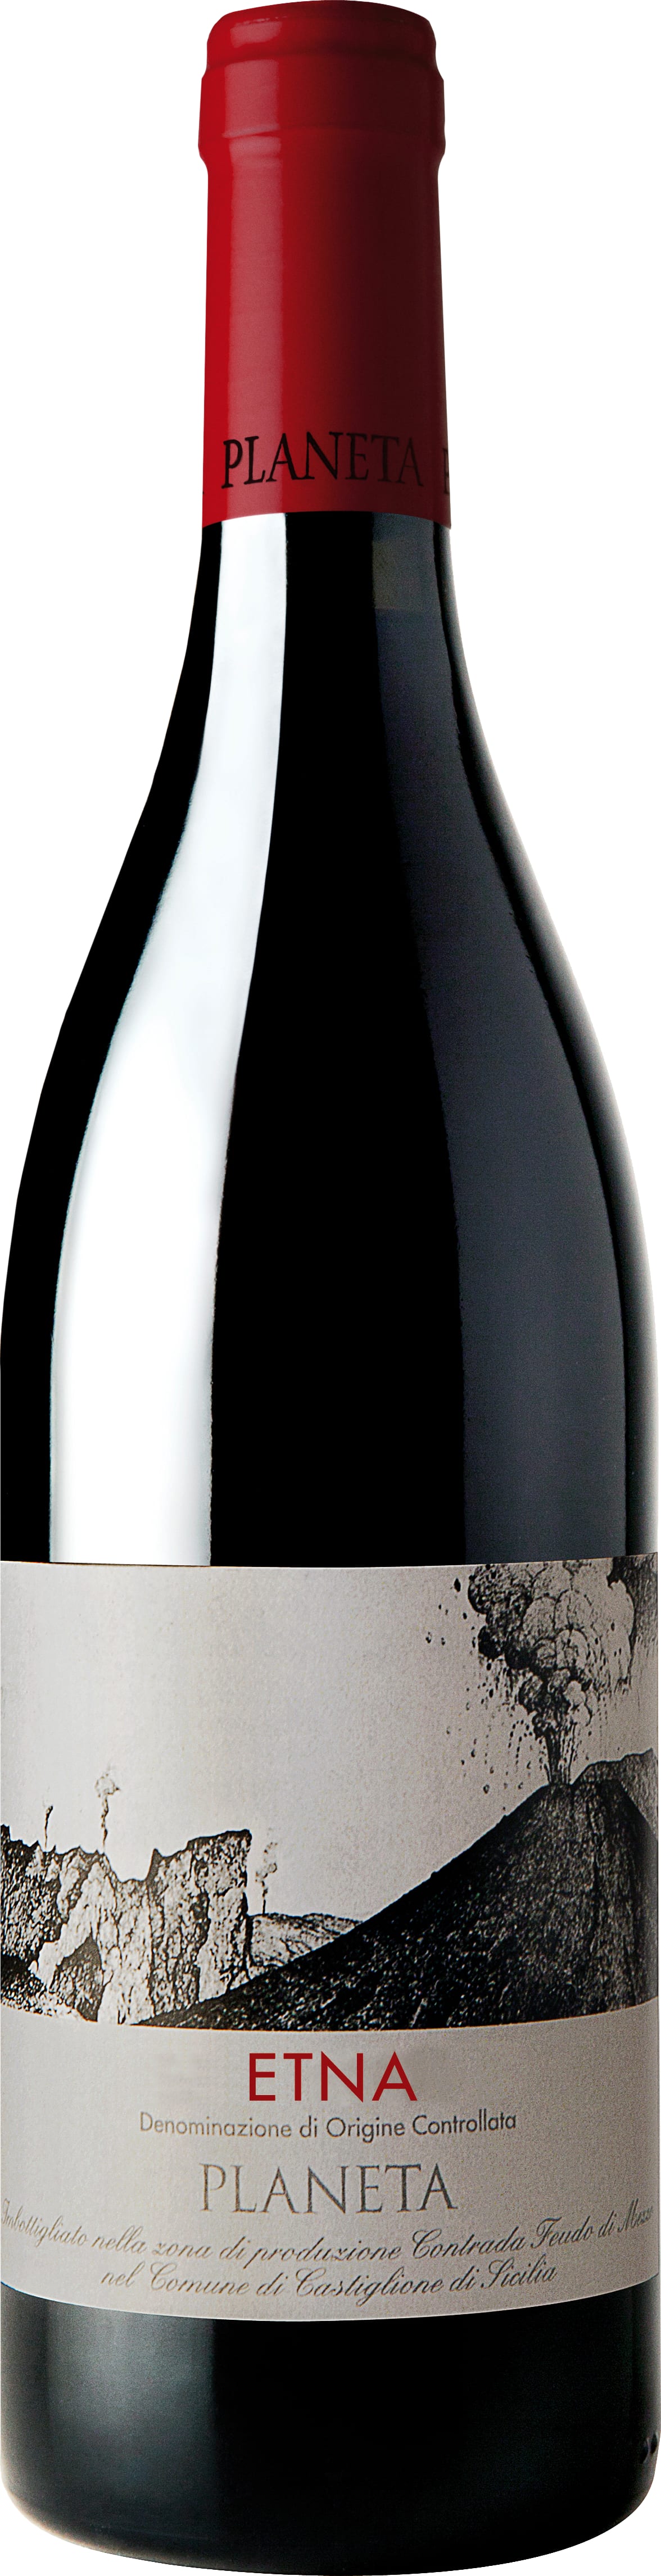 Planeta Etna Rosso DOC 2021 75cl - Buy Planeta Wines from GREAT WINES DIRECT wine shop